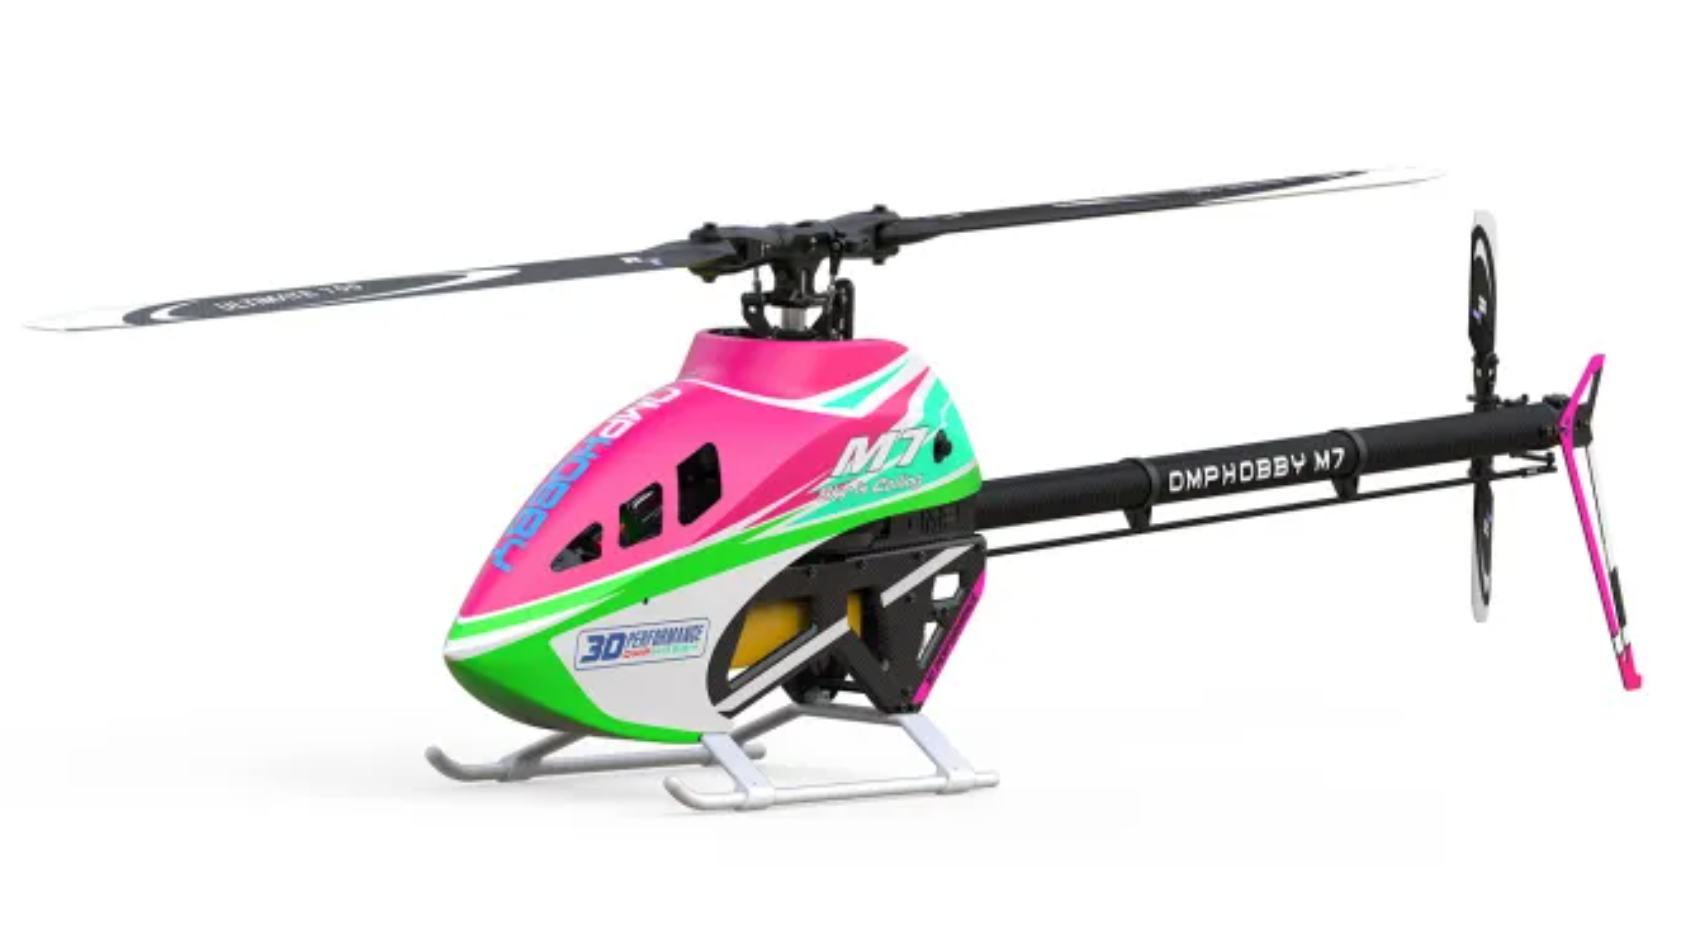 OMP Hobby M7 RC Helicopter Kit  (Tropical Pink)